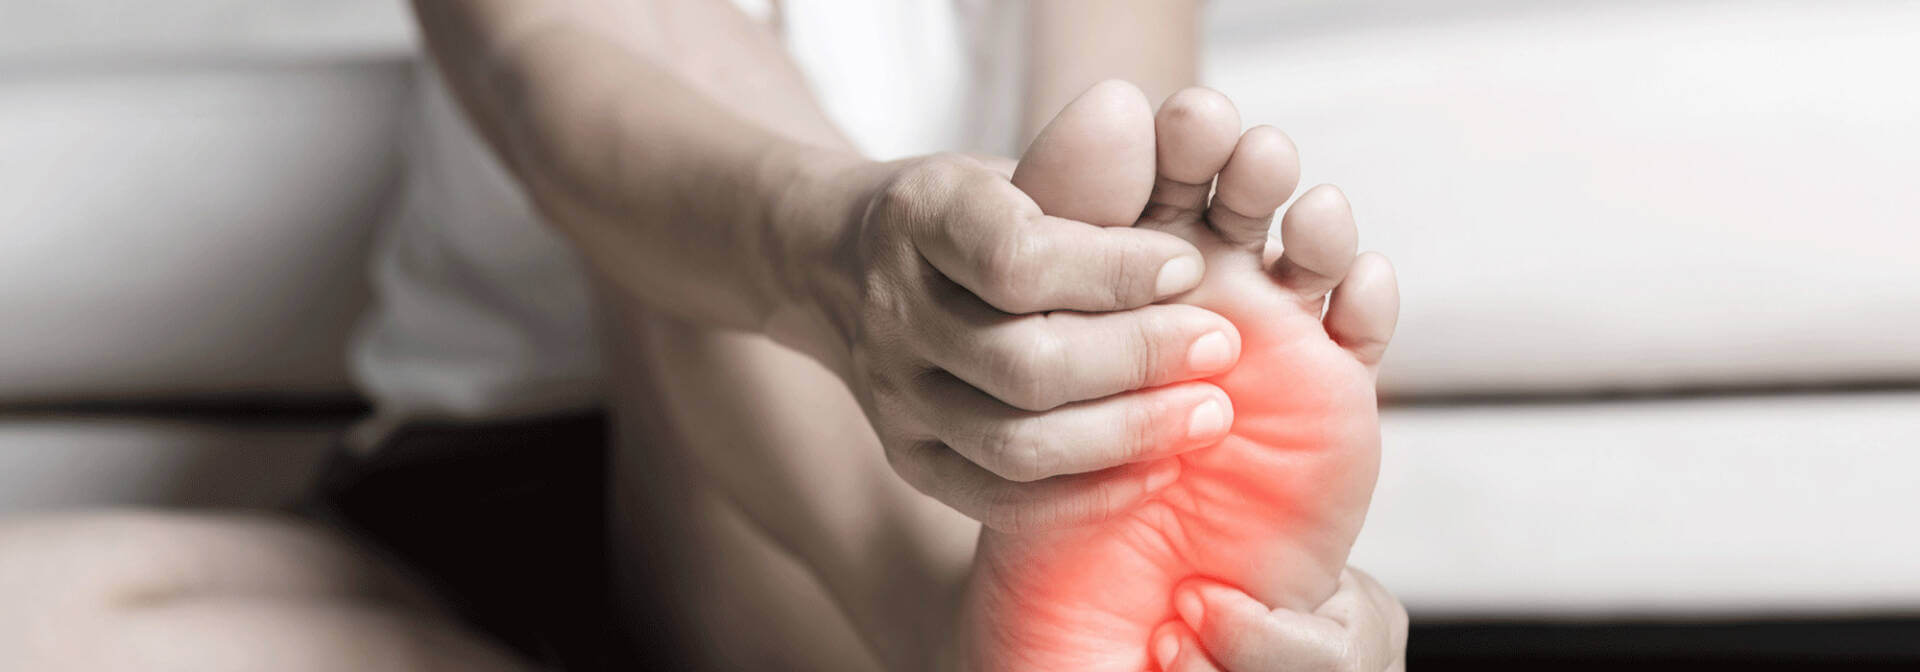 Burning Foot is very common and is treatable by Centennial Spine and Pain